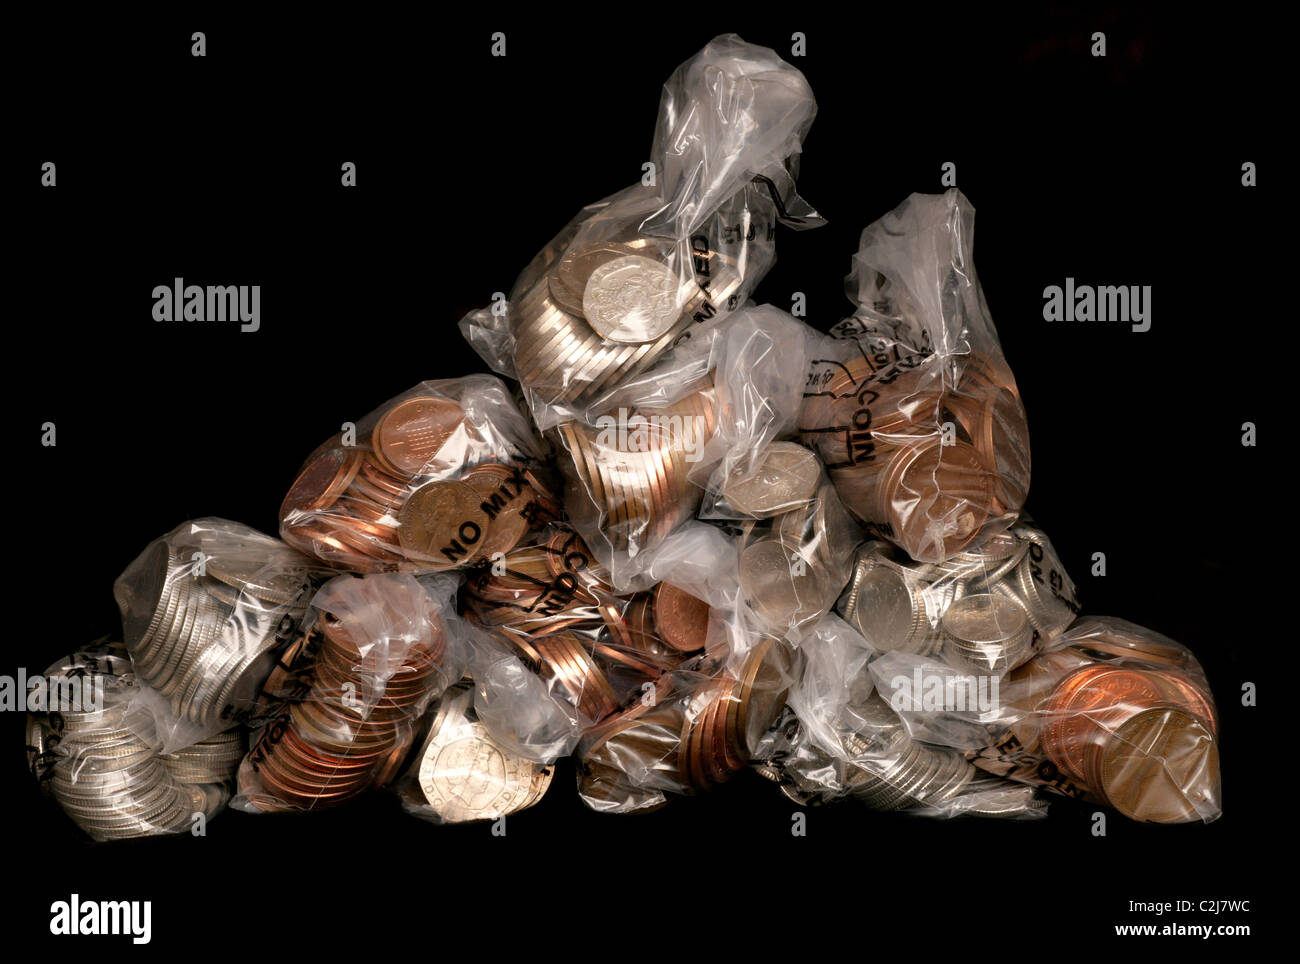 Pile of sterling coins in money bags studio cutout Stock Photo